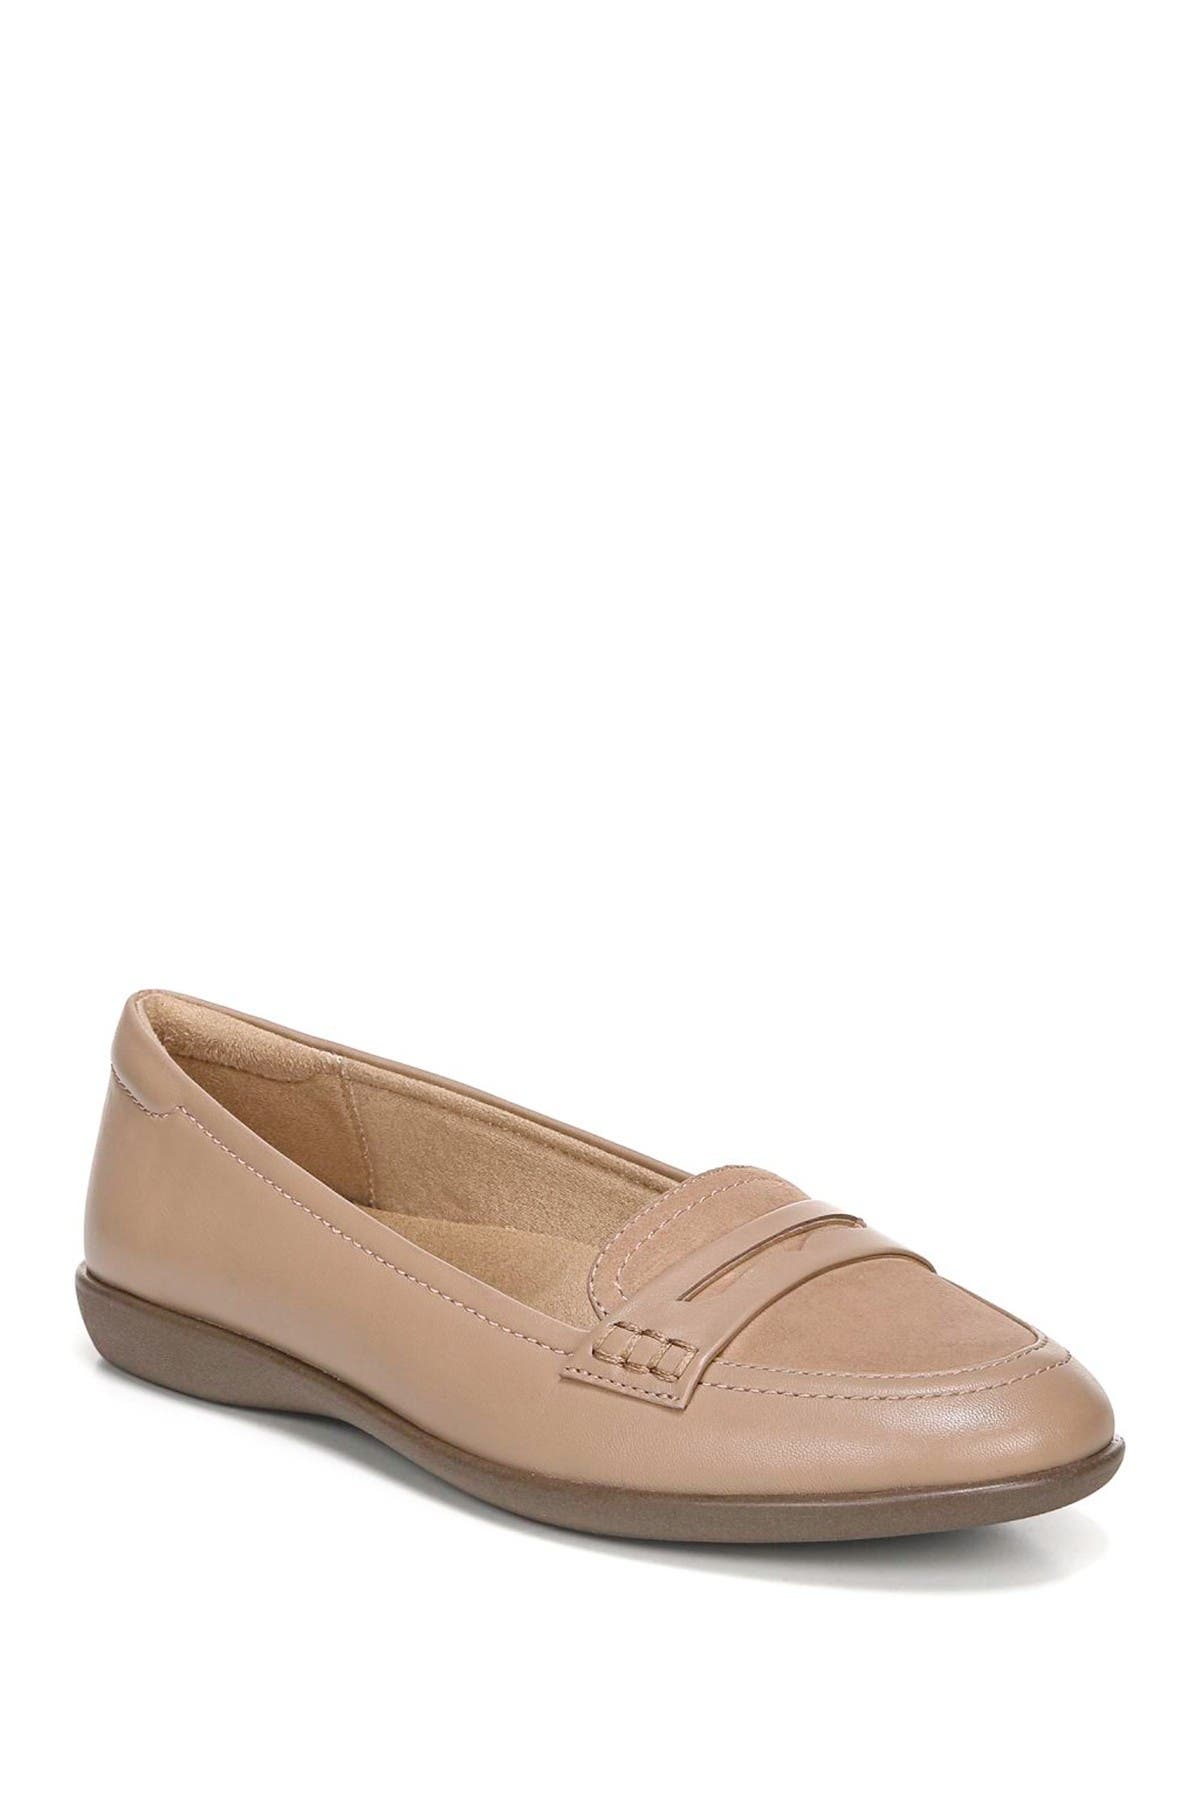 Finley Leather Penny Loafer 